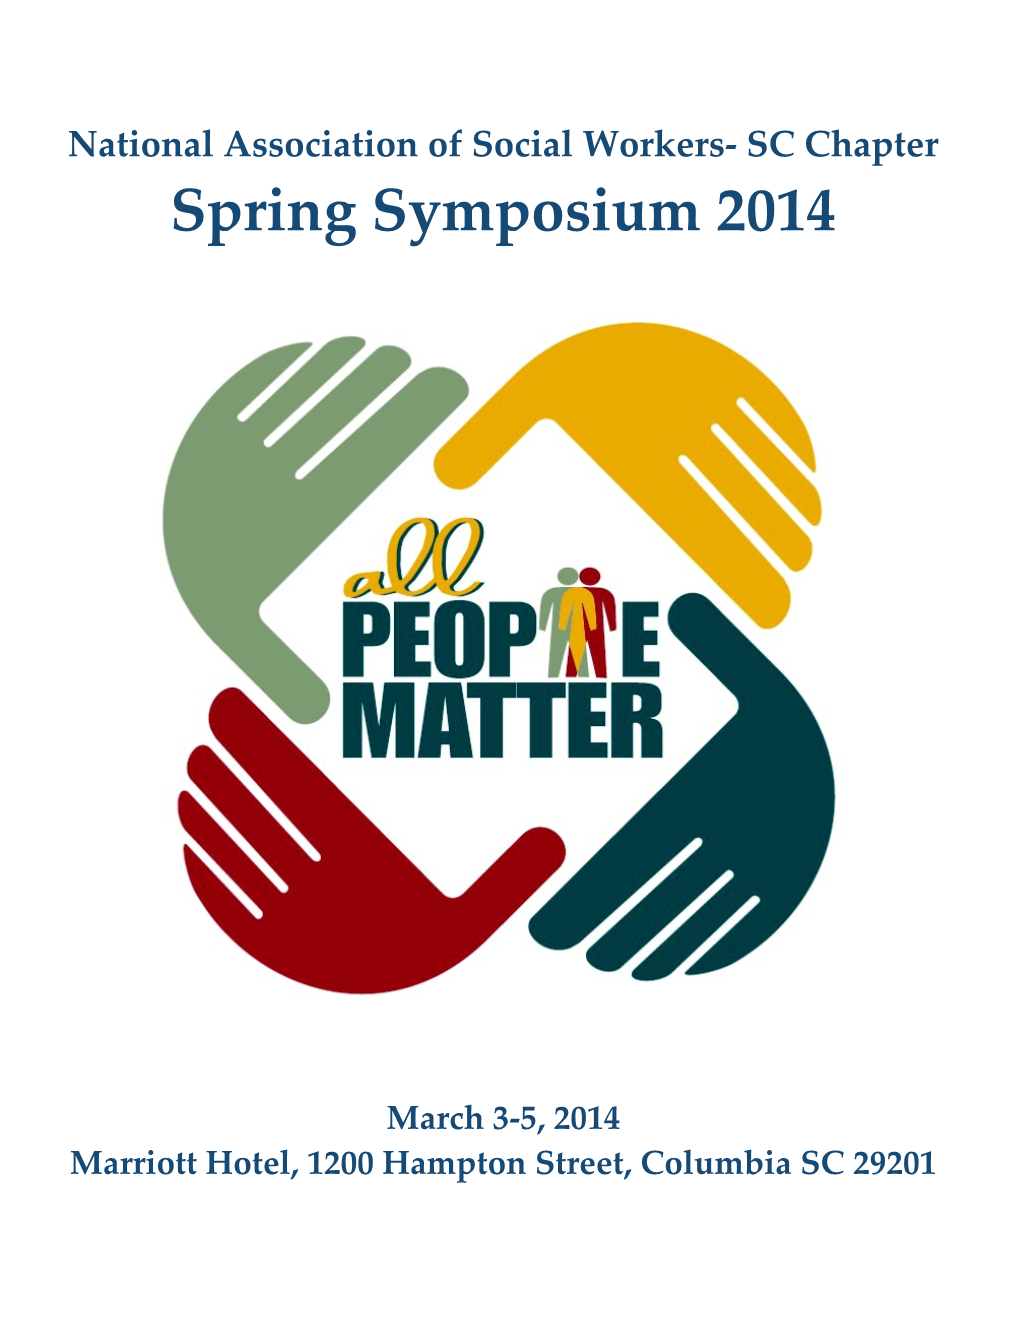 National Association of Social Workers- SC Chapter Spring Symposium 2014